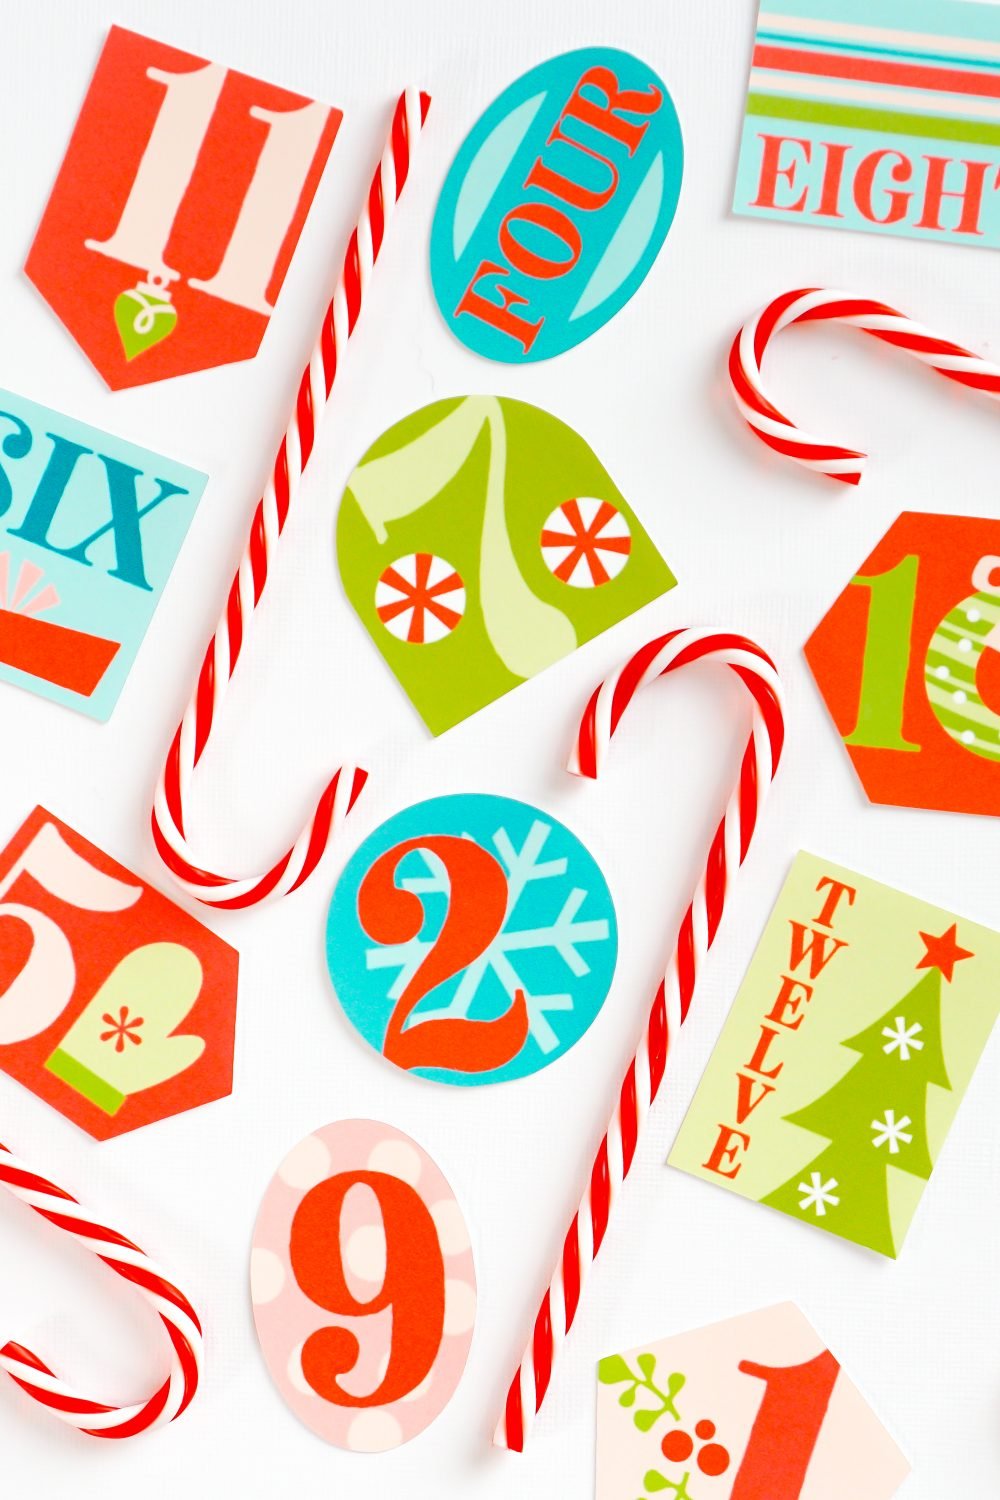 Finished 12 Days of Christmas gift tags staged with faux candy canes